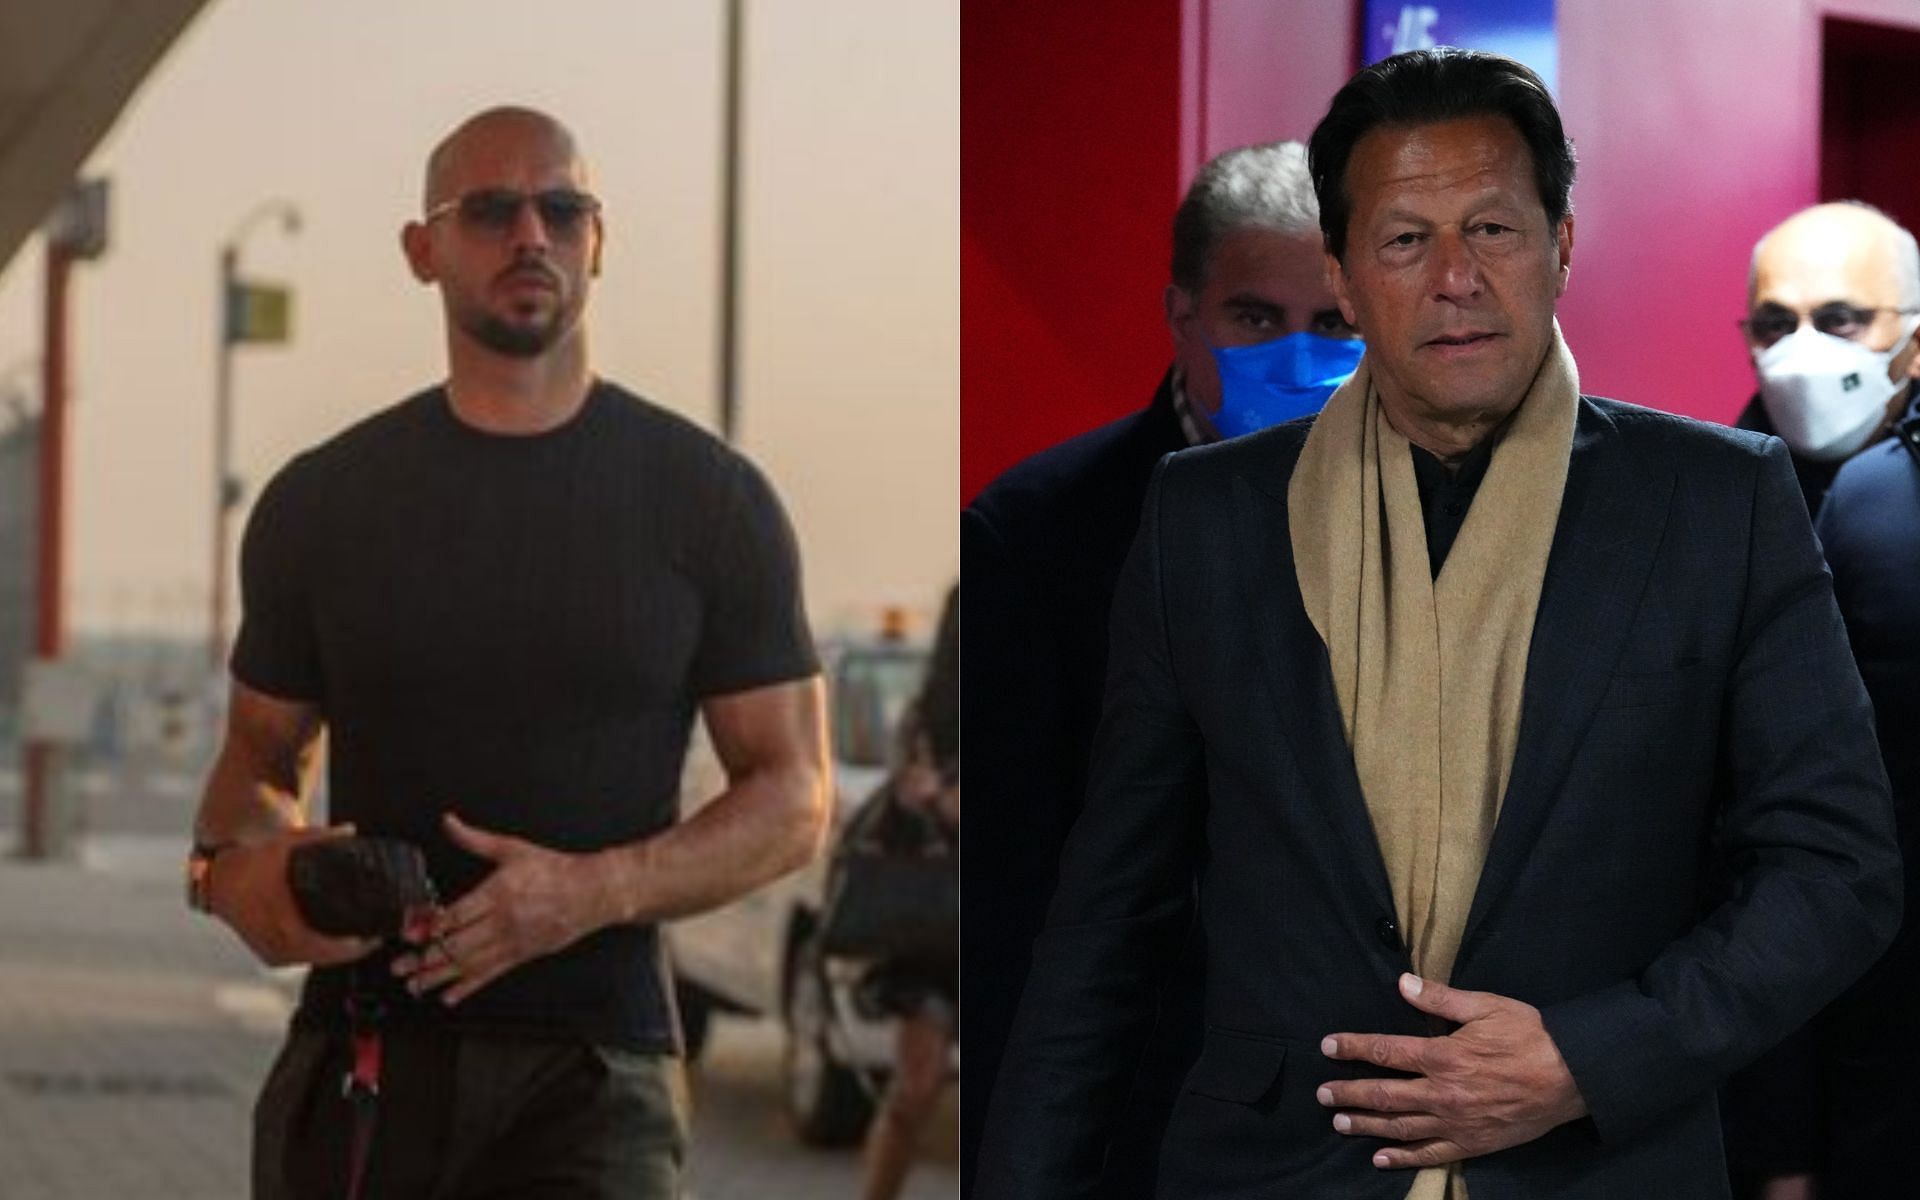 Andrew Tate (left) and Imran Khan (right) (Image credits Getty Images and @Cobratate on Twitter)